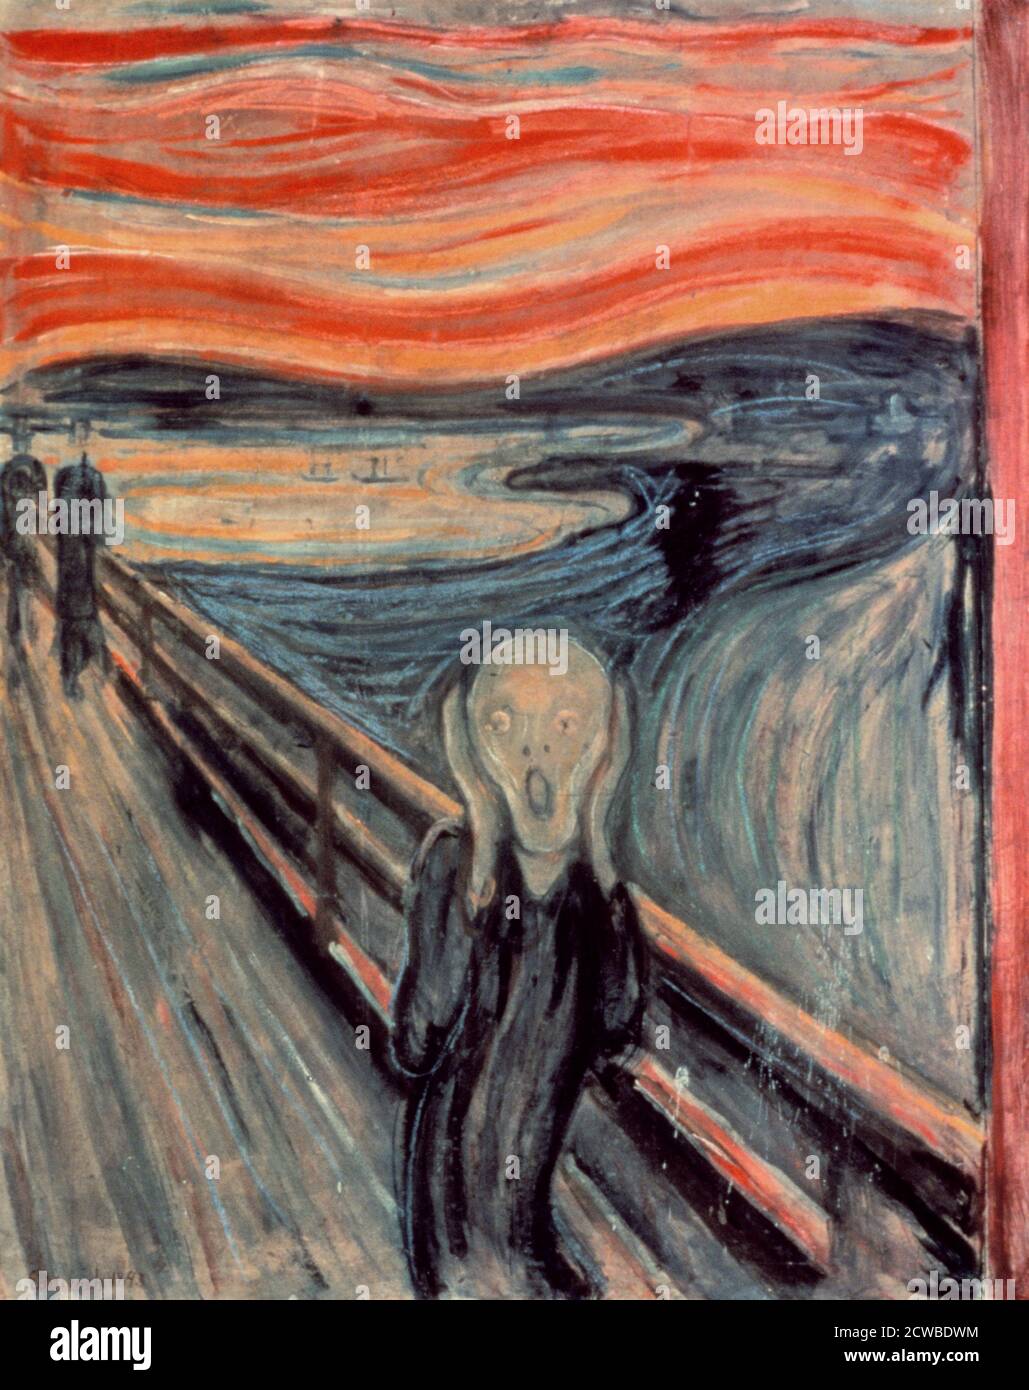 The Scream', 1893 Artist: Edvard Munch. The Scream is one of four versions painted by Edward Munch in 1893. The ghostly, agonised figure against the background of a red sunset is one of the most well known images in the world of art - a symbol of despair and alienation. From the Nasjonalgalleriet, Oslo. Stock Photo